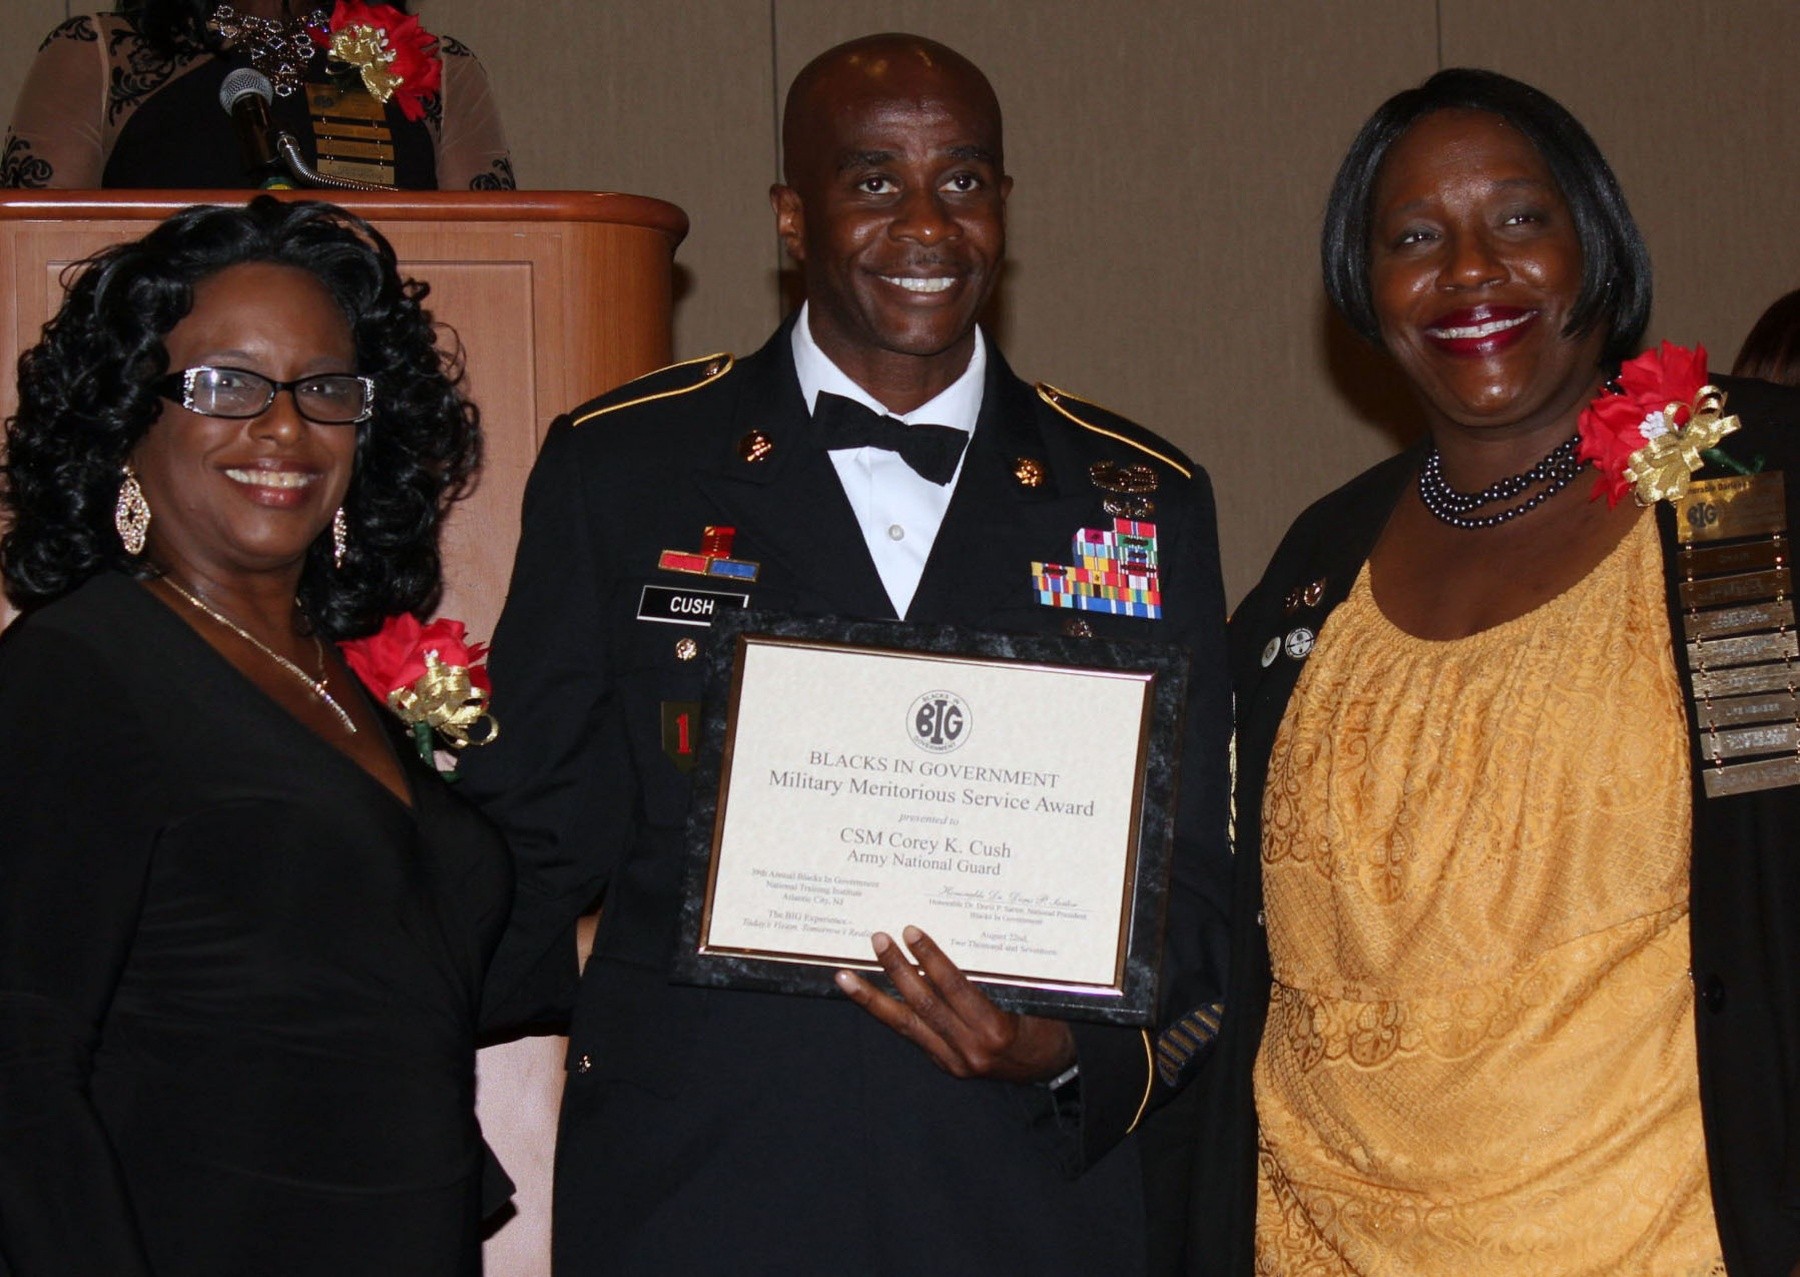 New York Army Guard NCO recognized by Blacks in Government organization